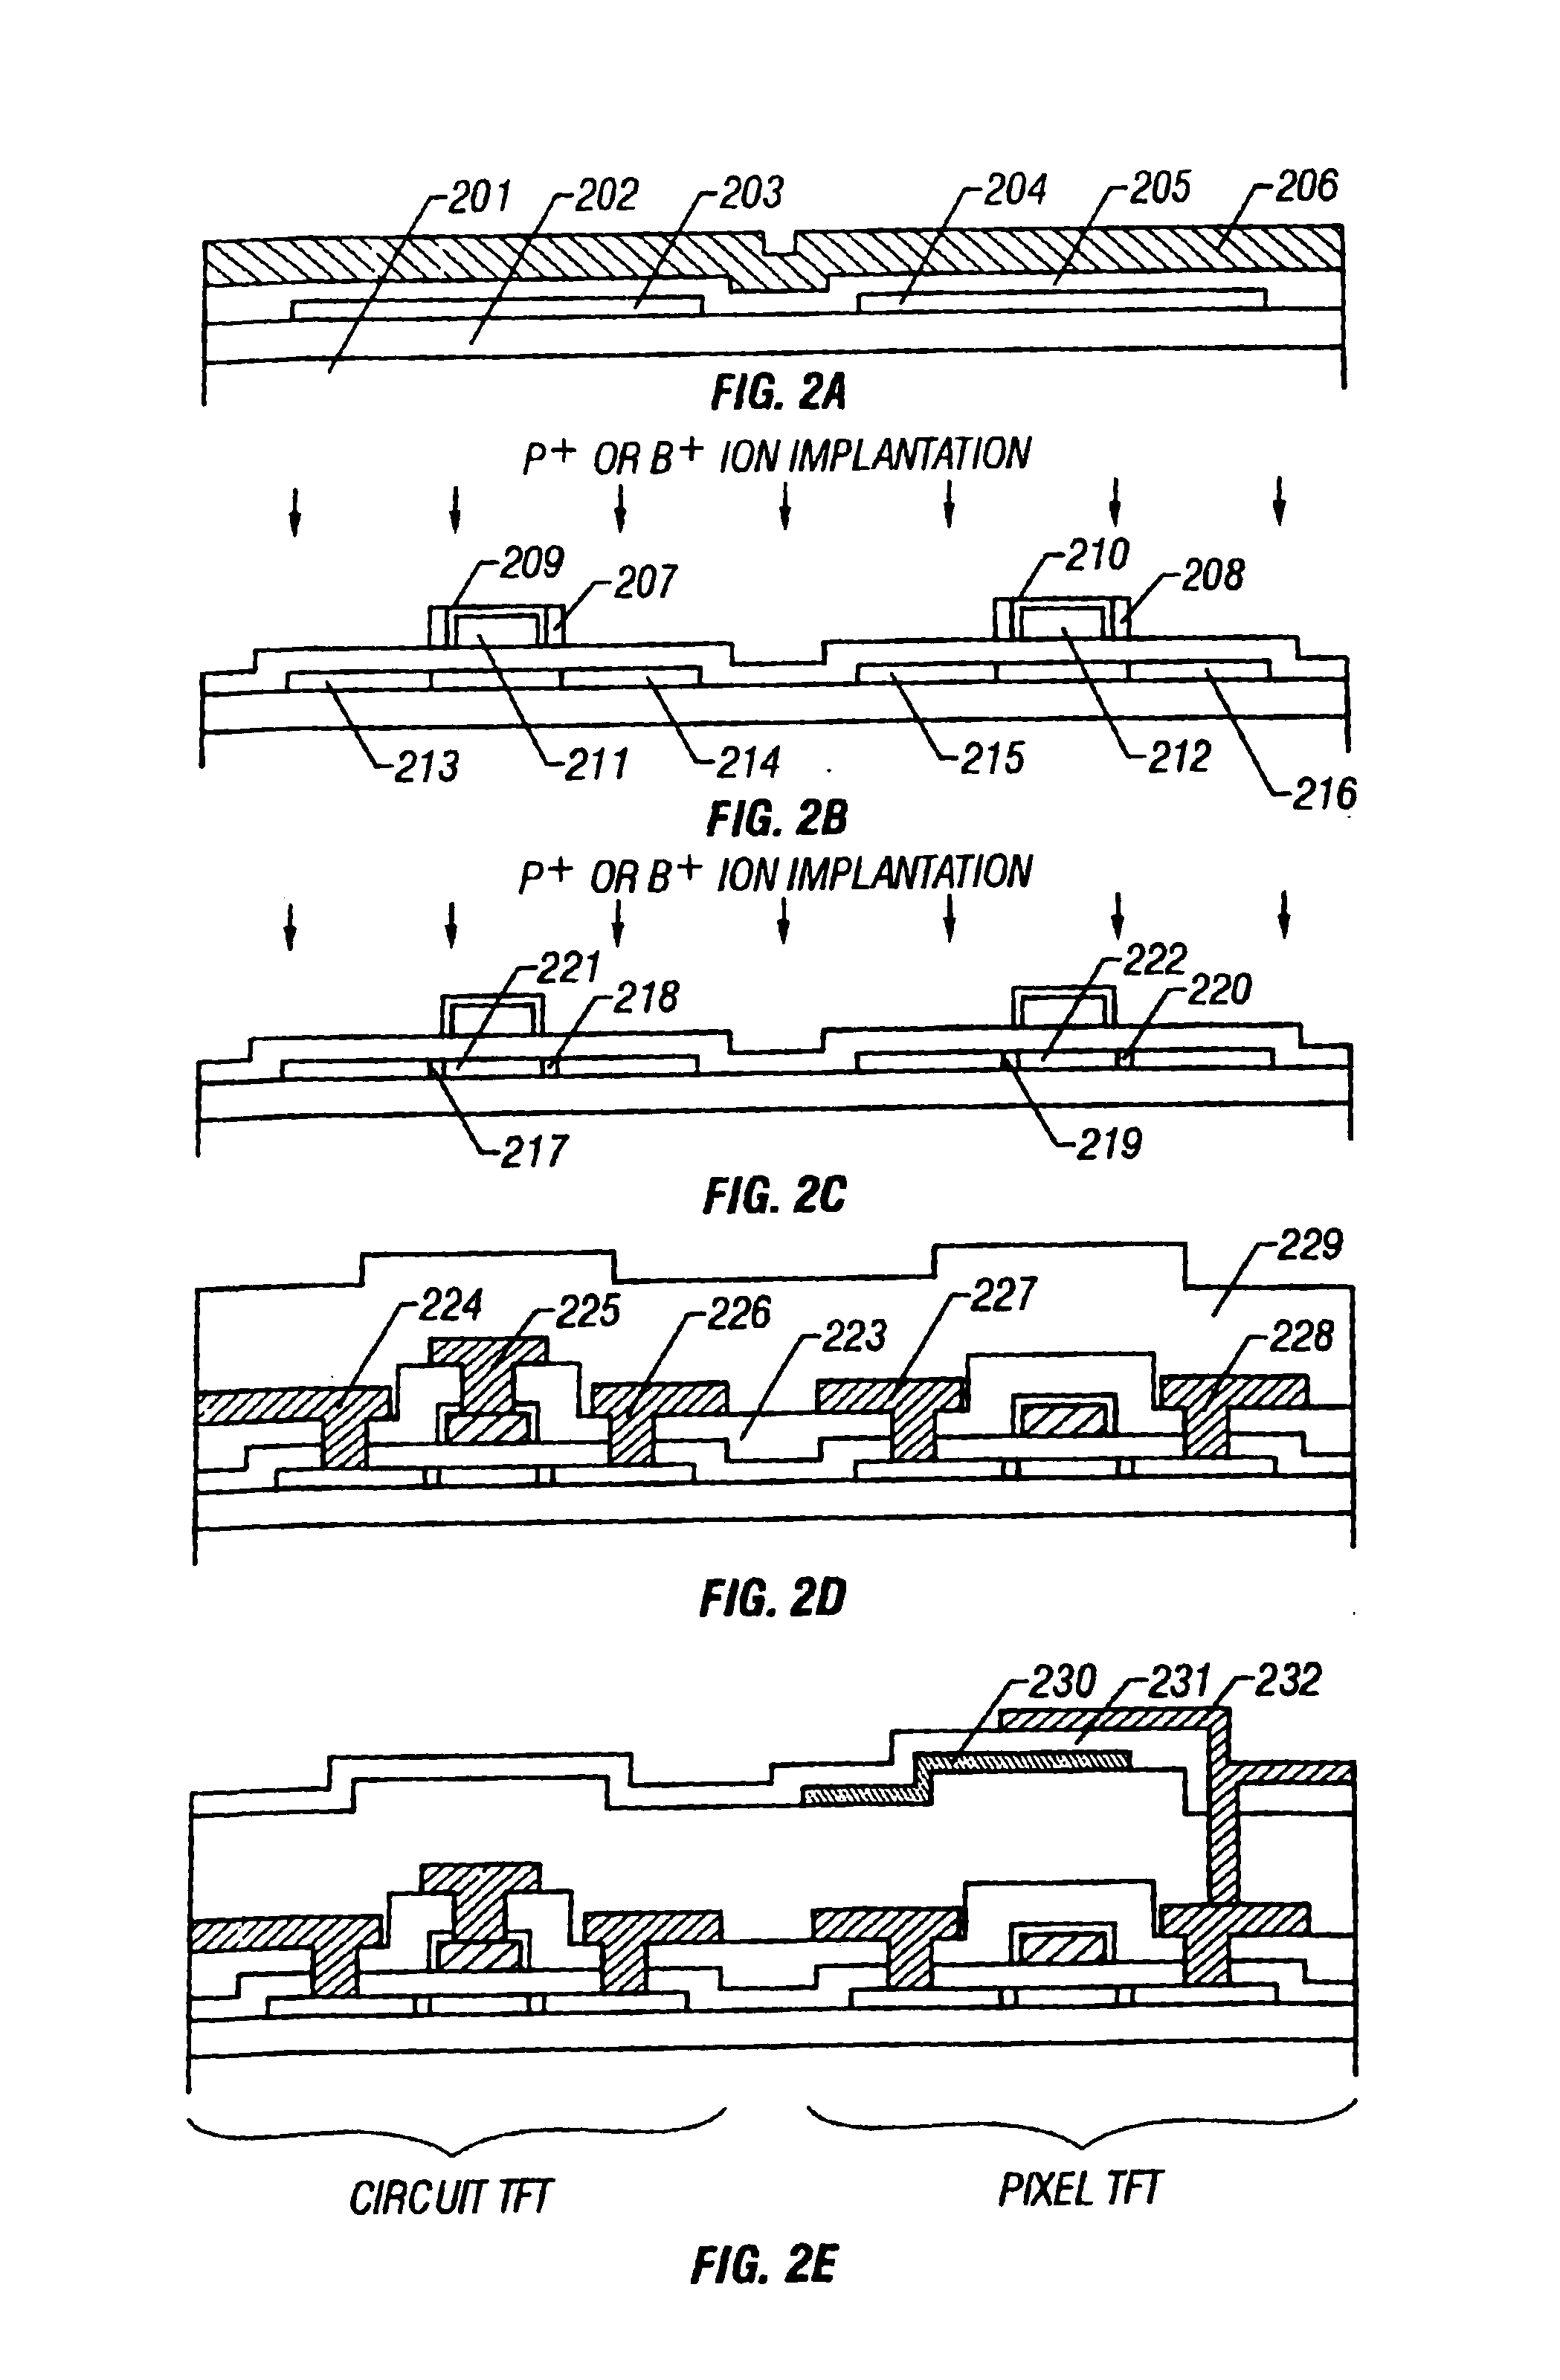 Liquid crystal display device and method for fabricating thereof